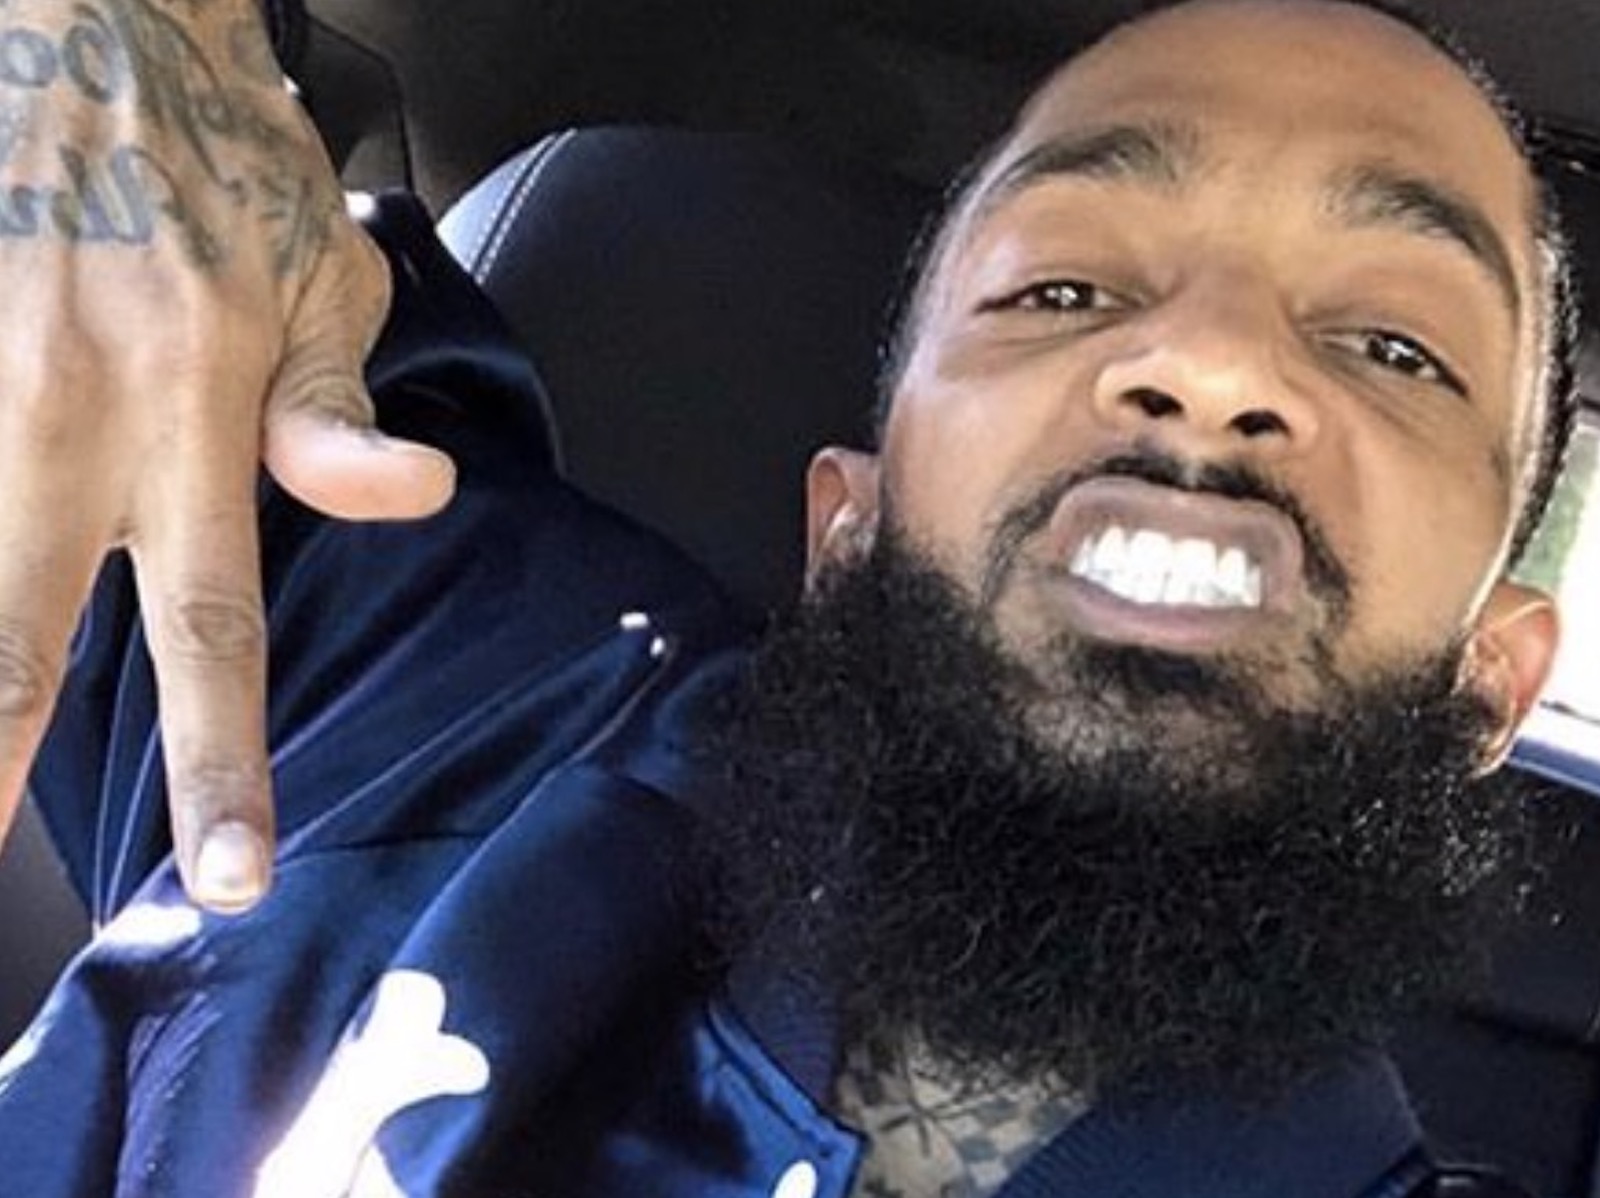 The Internet's Convinced Nipsey Hussle's Murder Is A Government Conspiracy